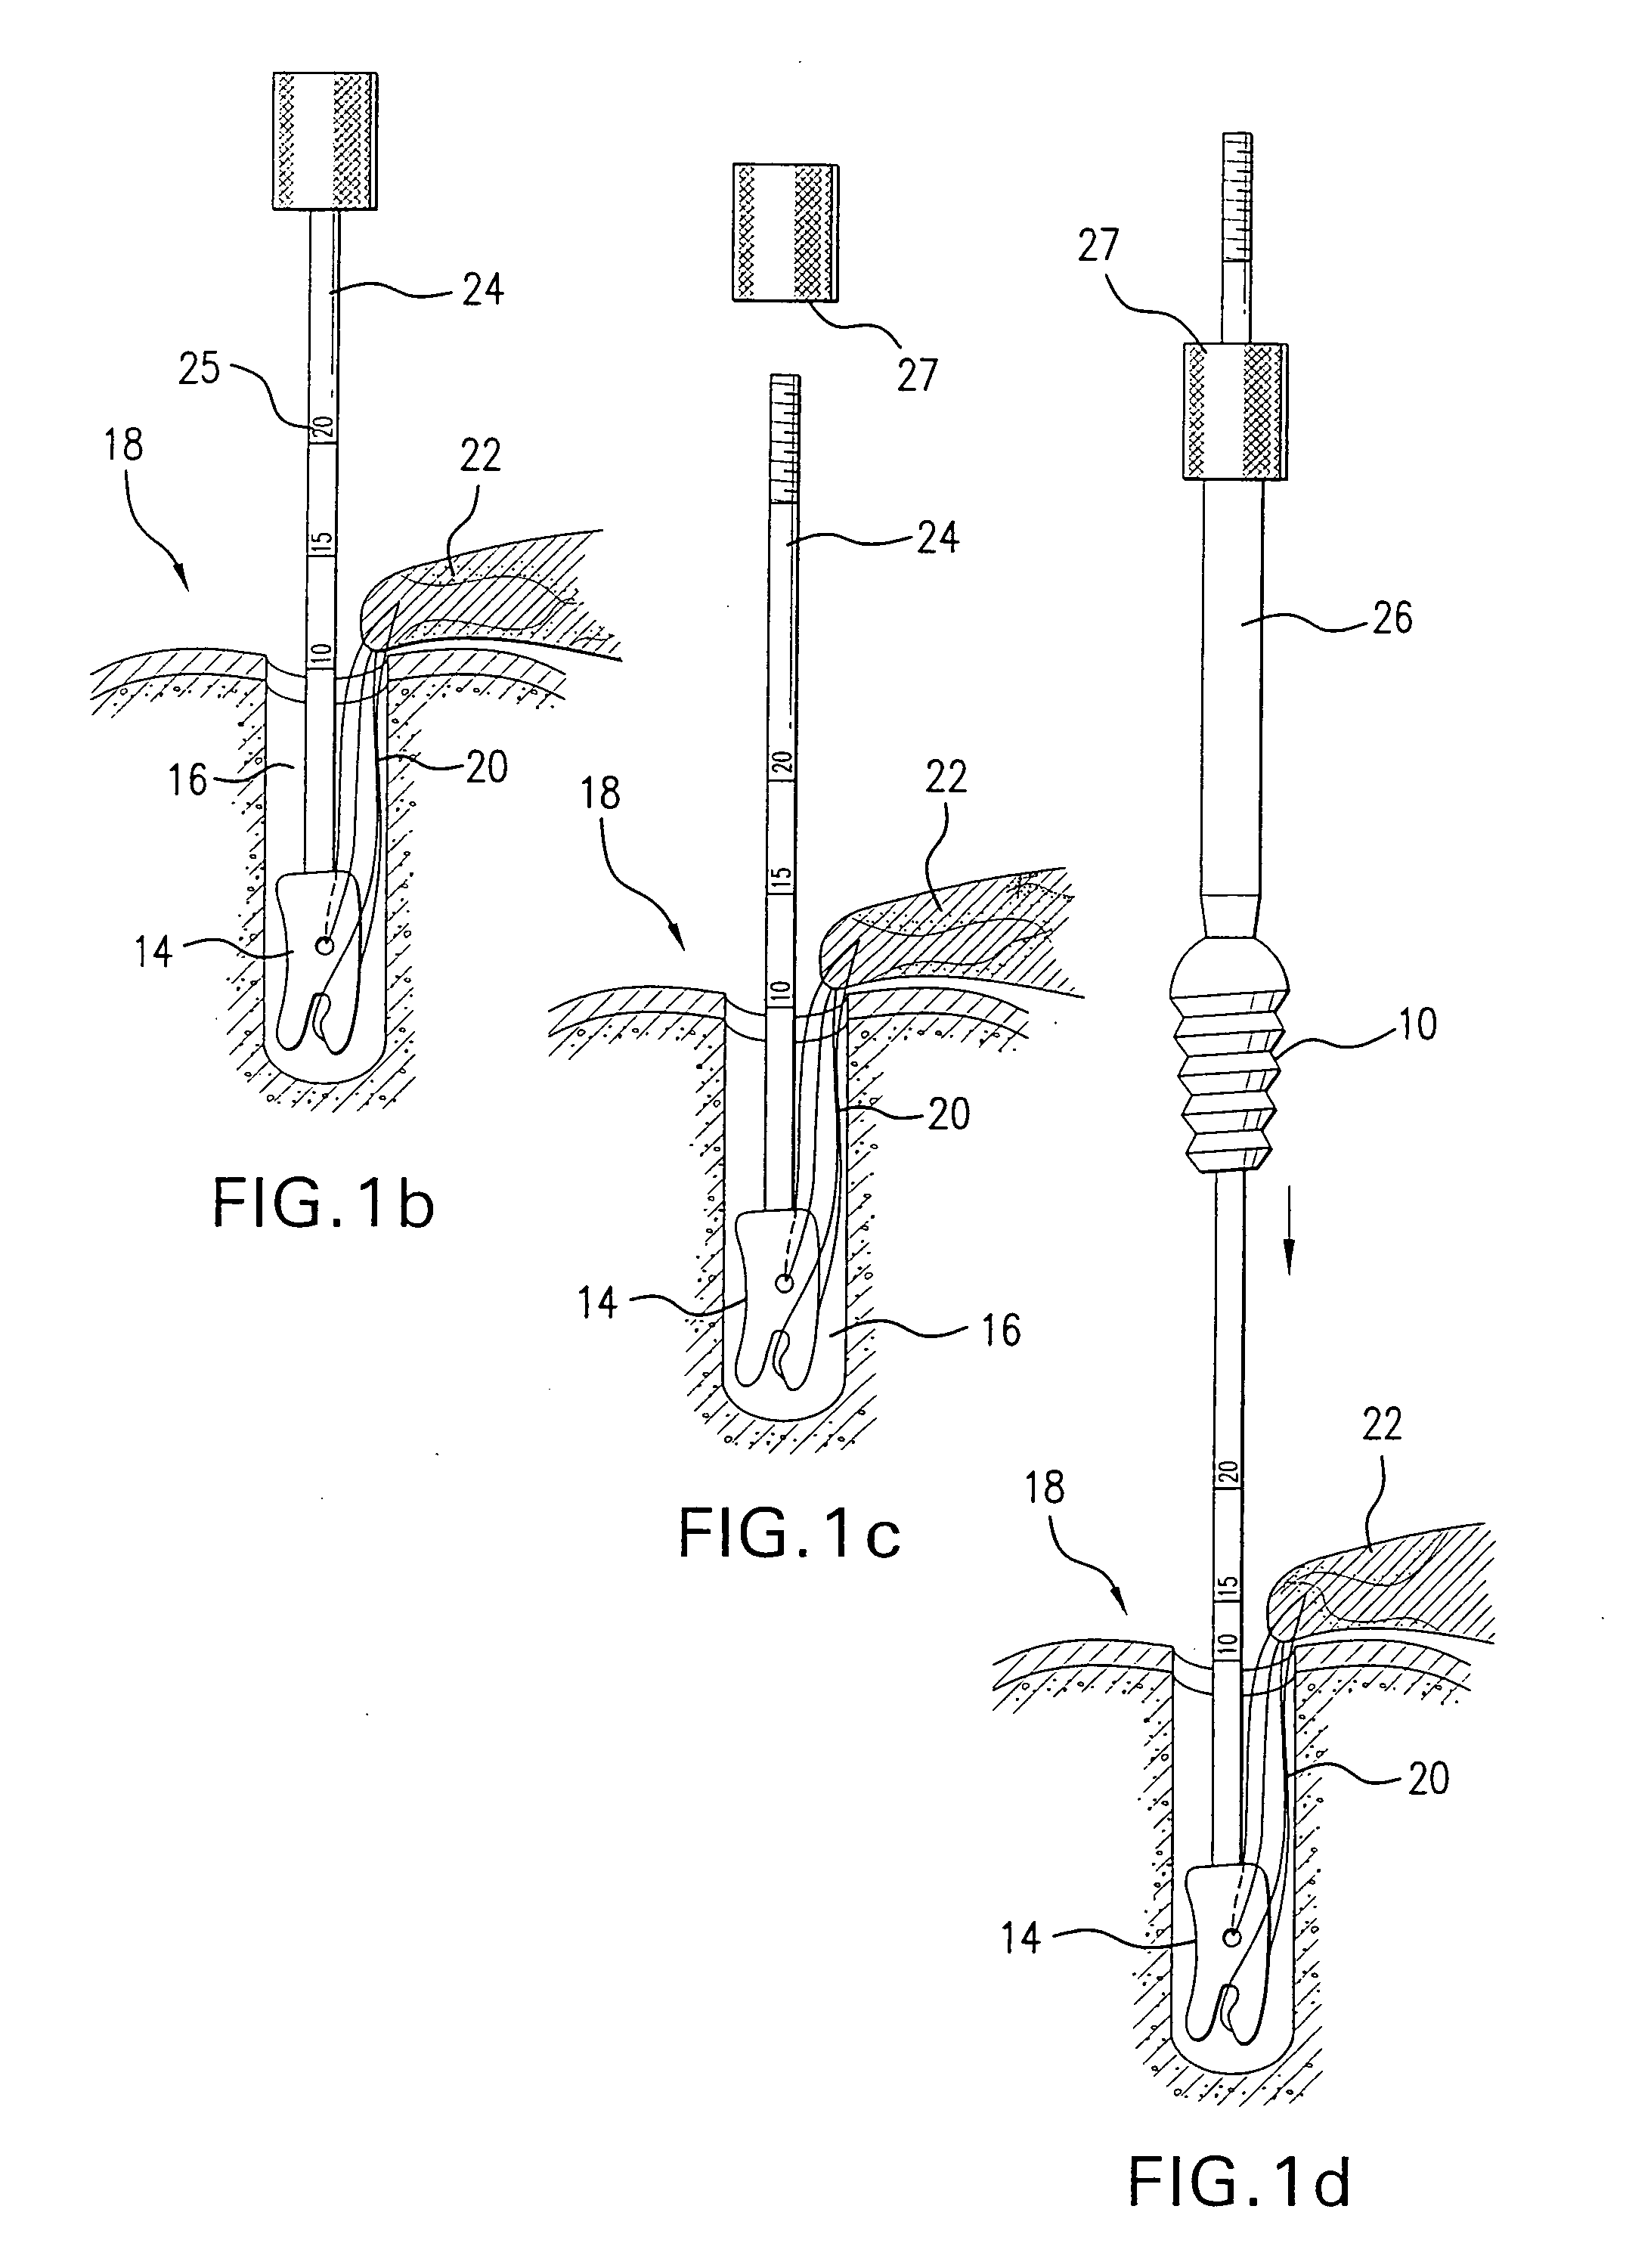 Method and device for securing sutures to bones